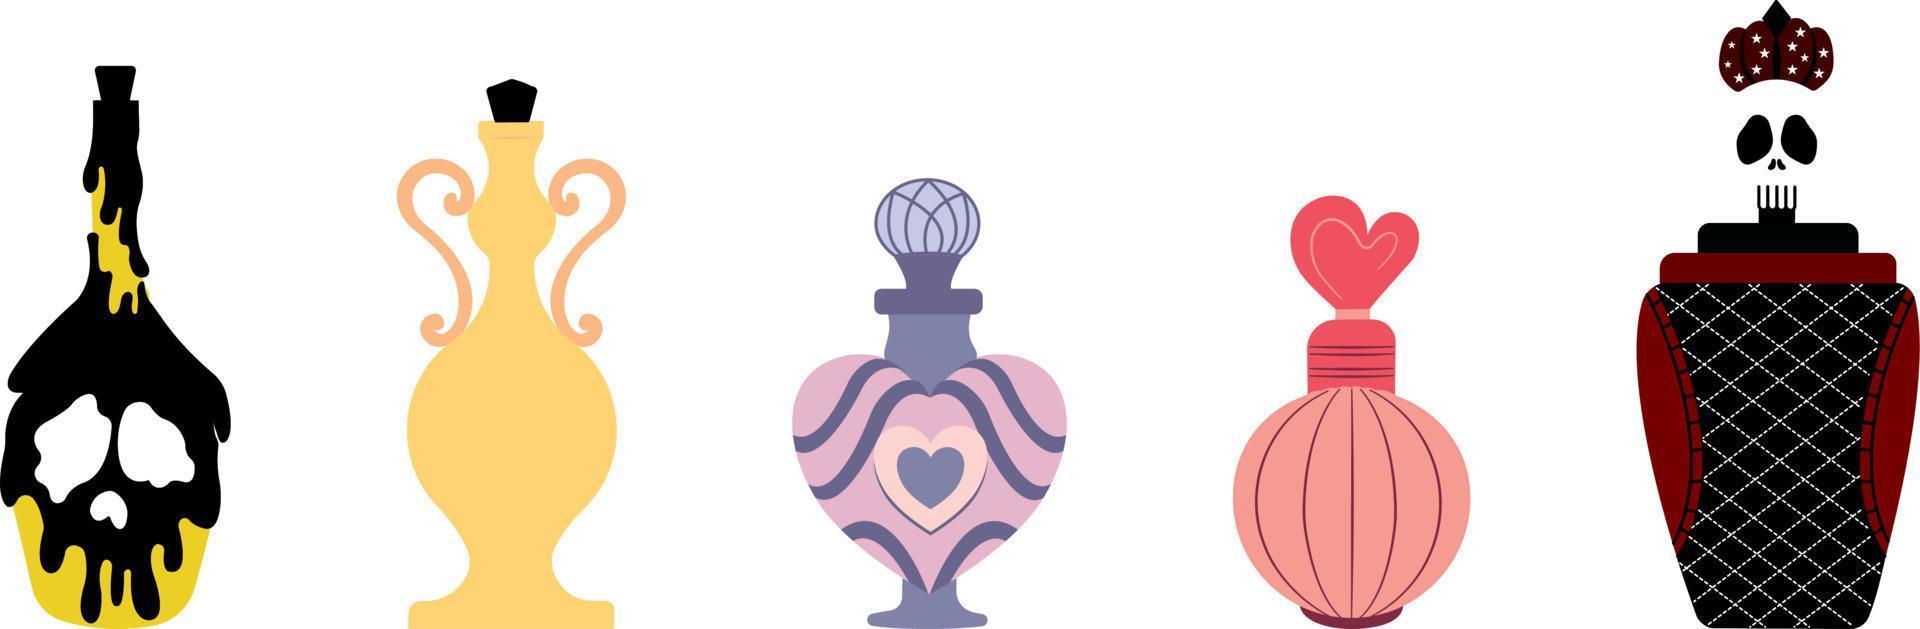 Alchemy vector illustration of a set of bottles with magic potions, a magic jar with crystal.